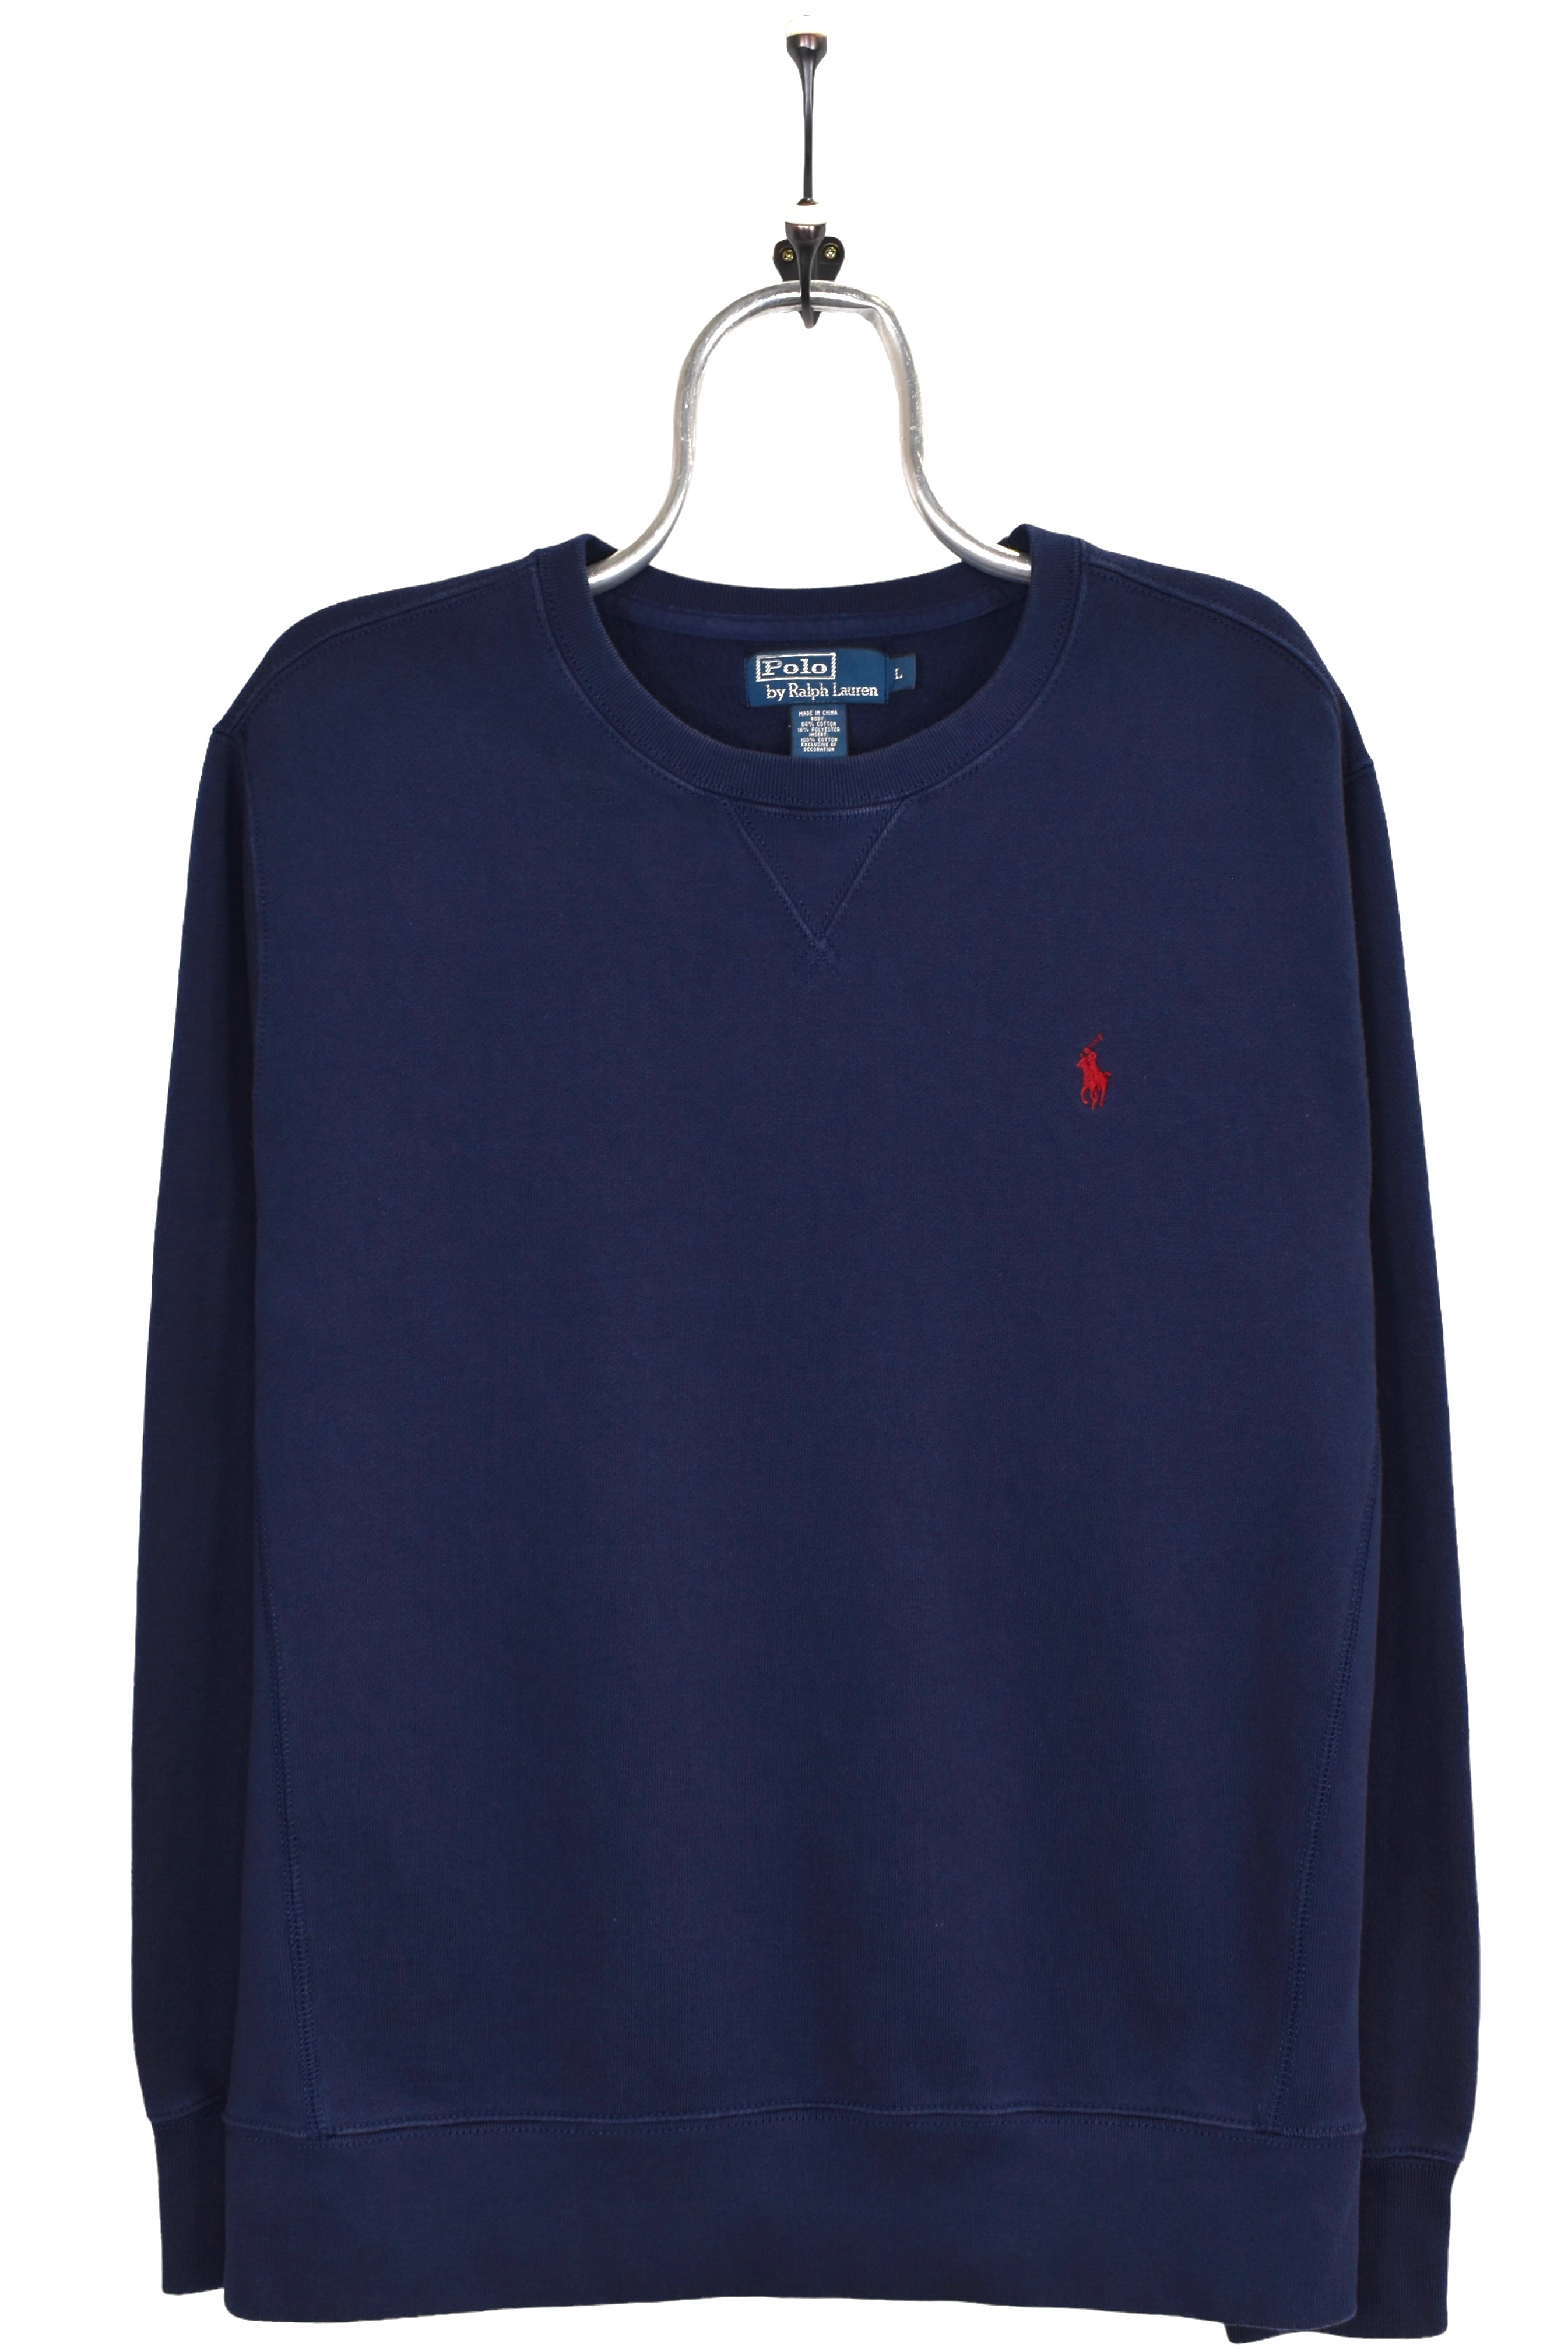 Vintage Blue and Red T-Shirt by Chaps Ralph Lauren